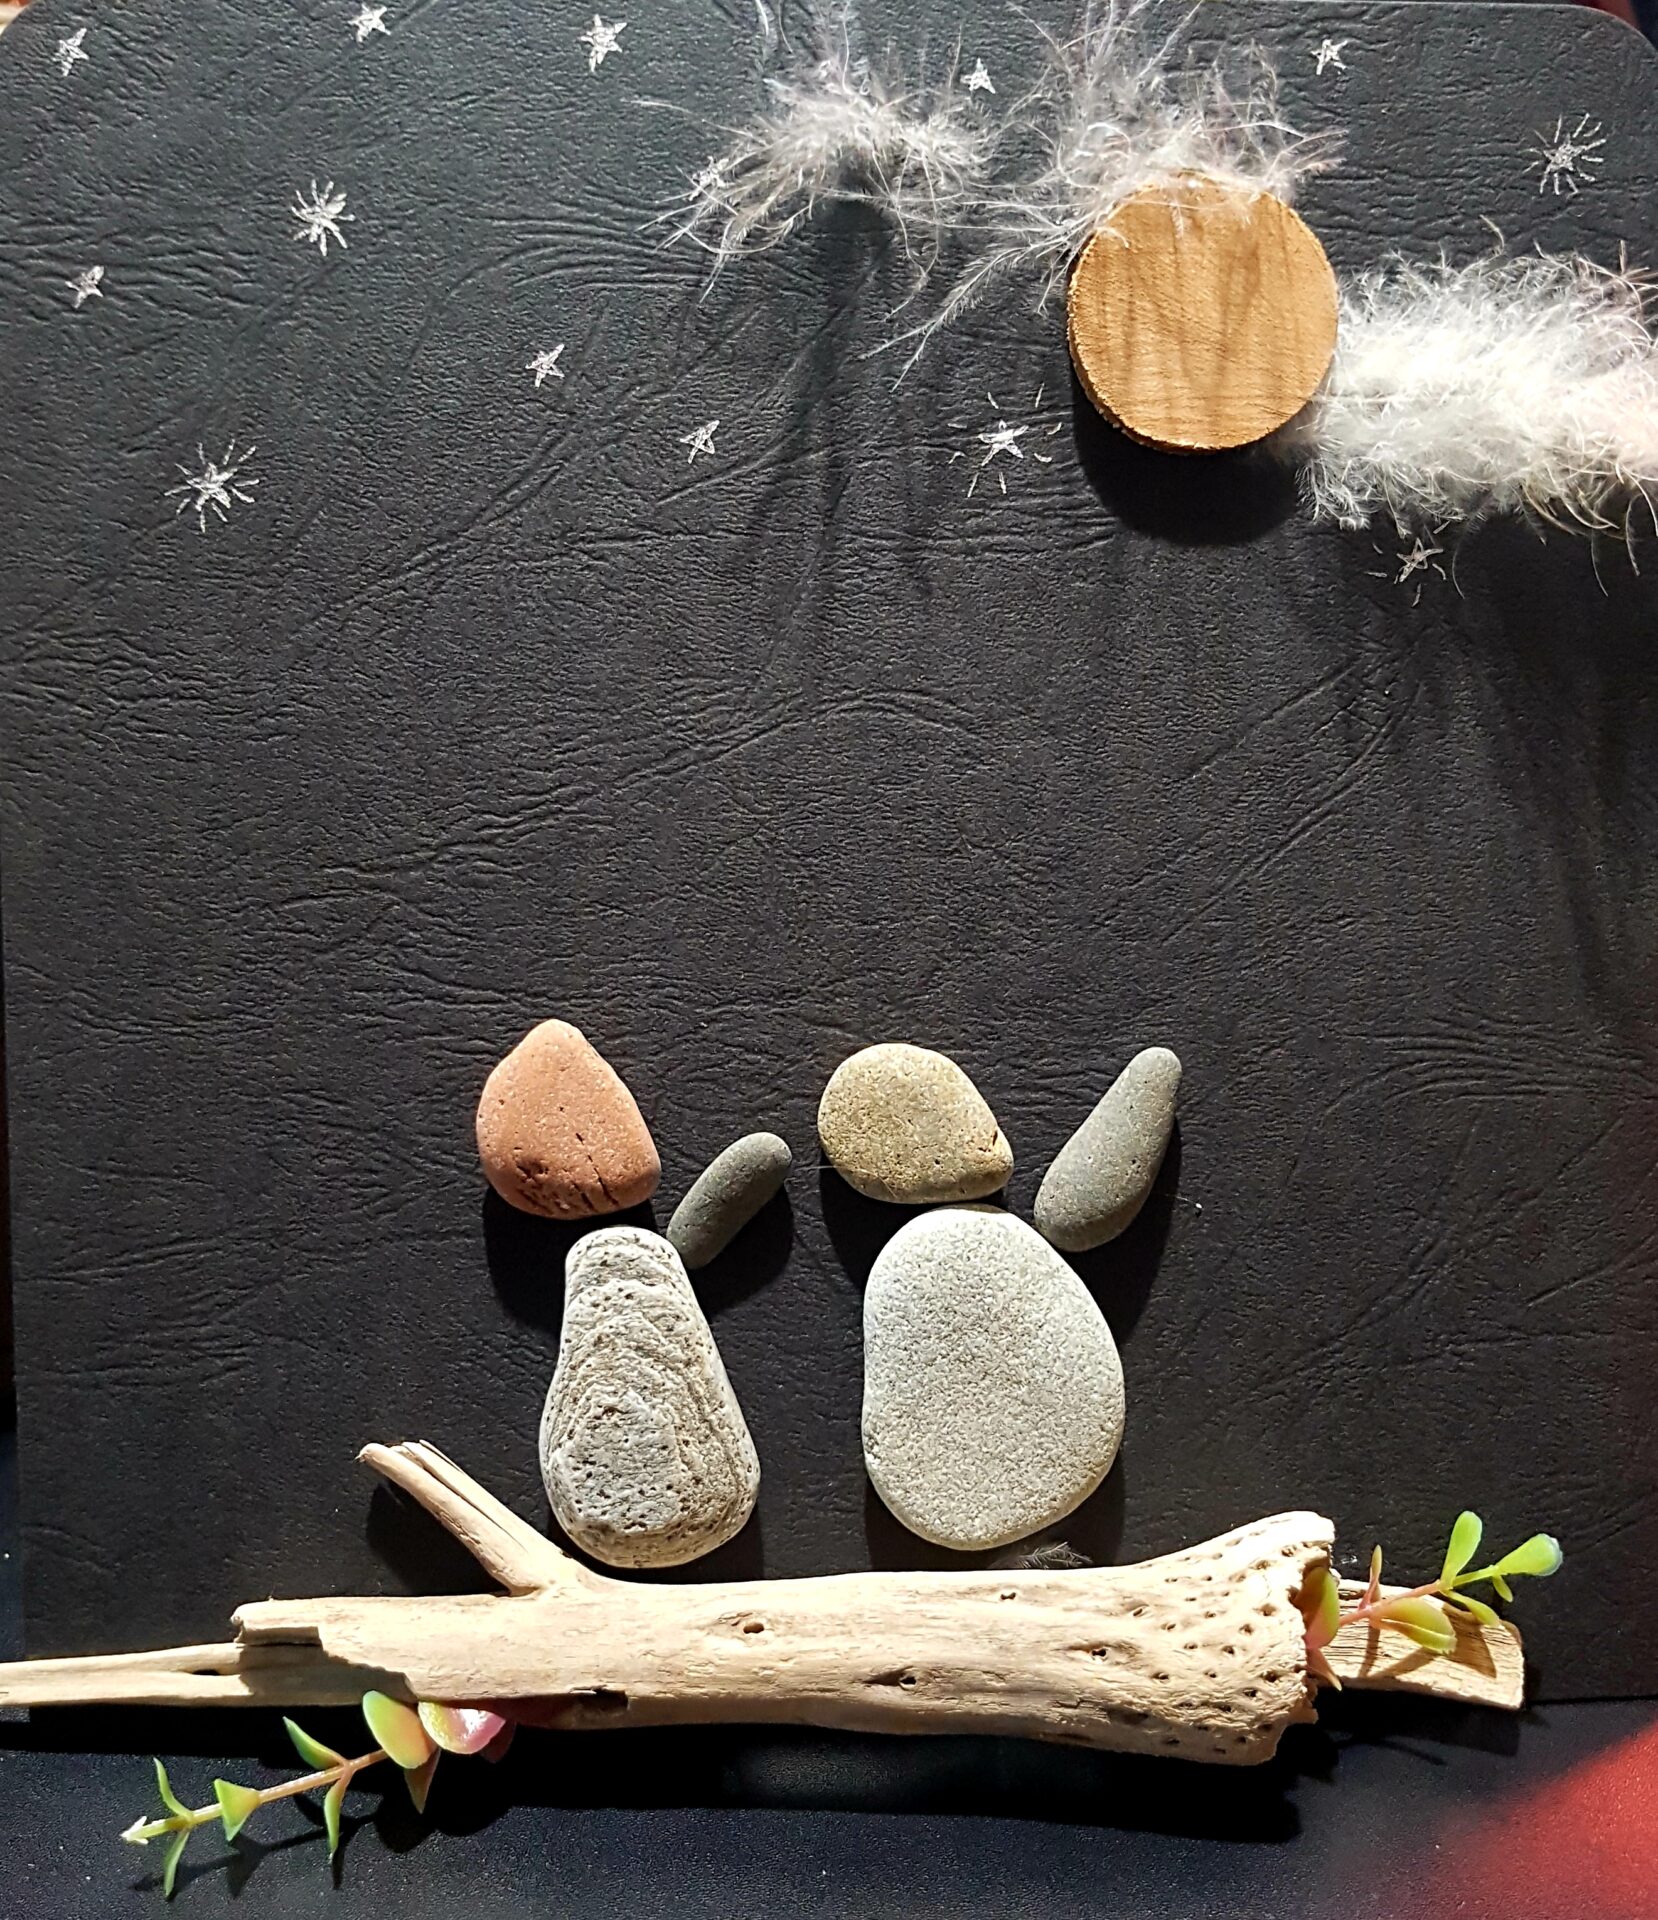 Image of Nature Craft – Rock and Pebble Art event